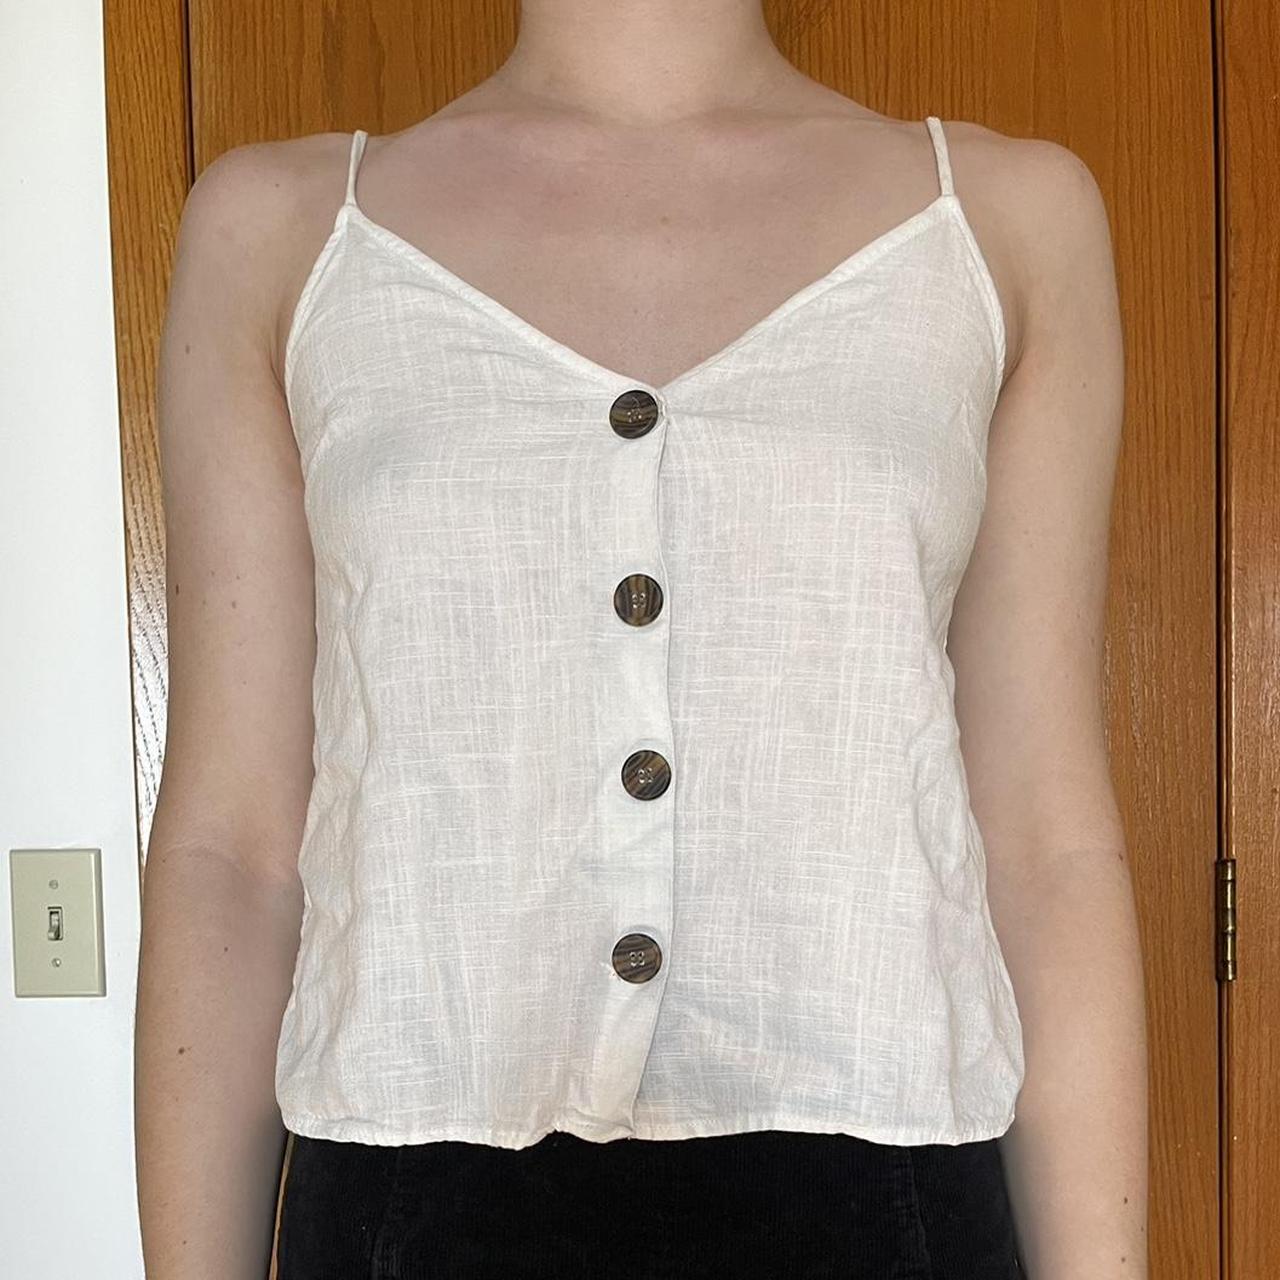 Super cute slightly sheer white camisole with - Depop